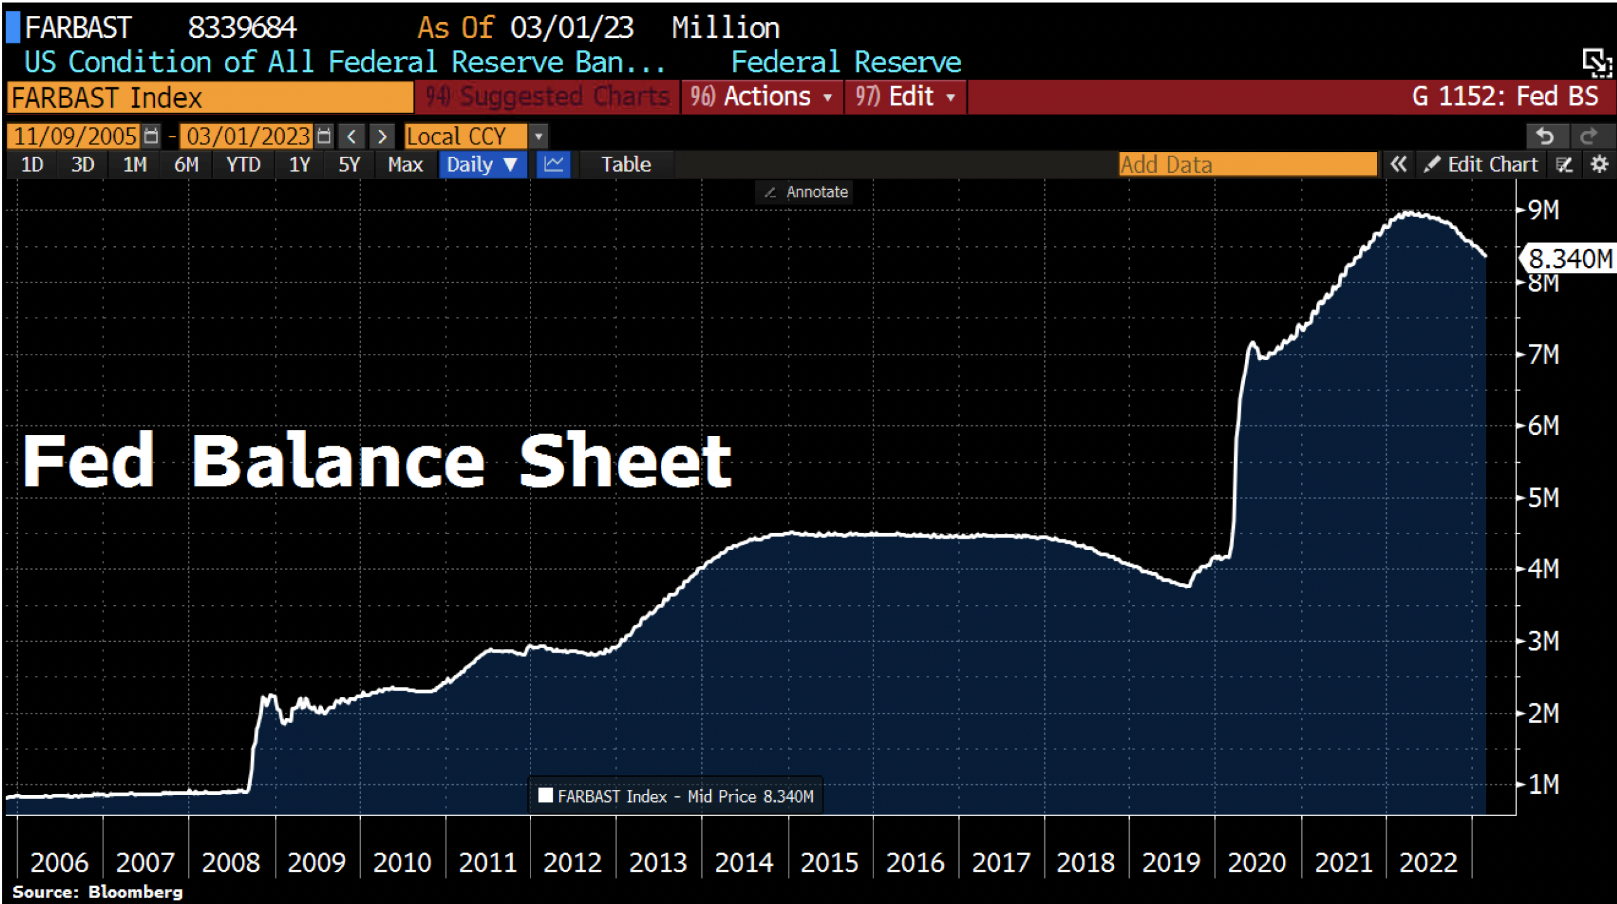 FED Balance Sheet as of March 1st, 2023